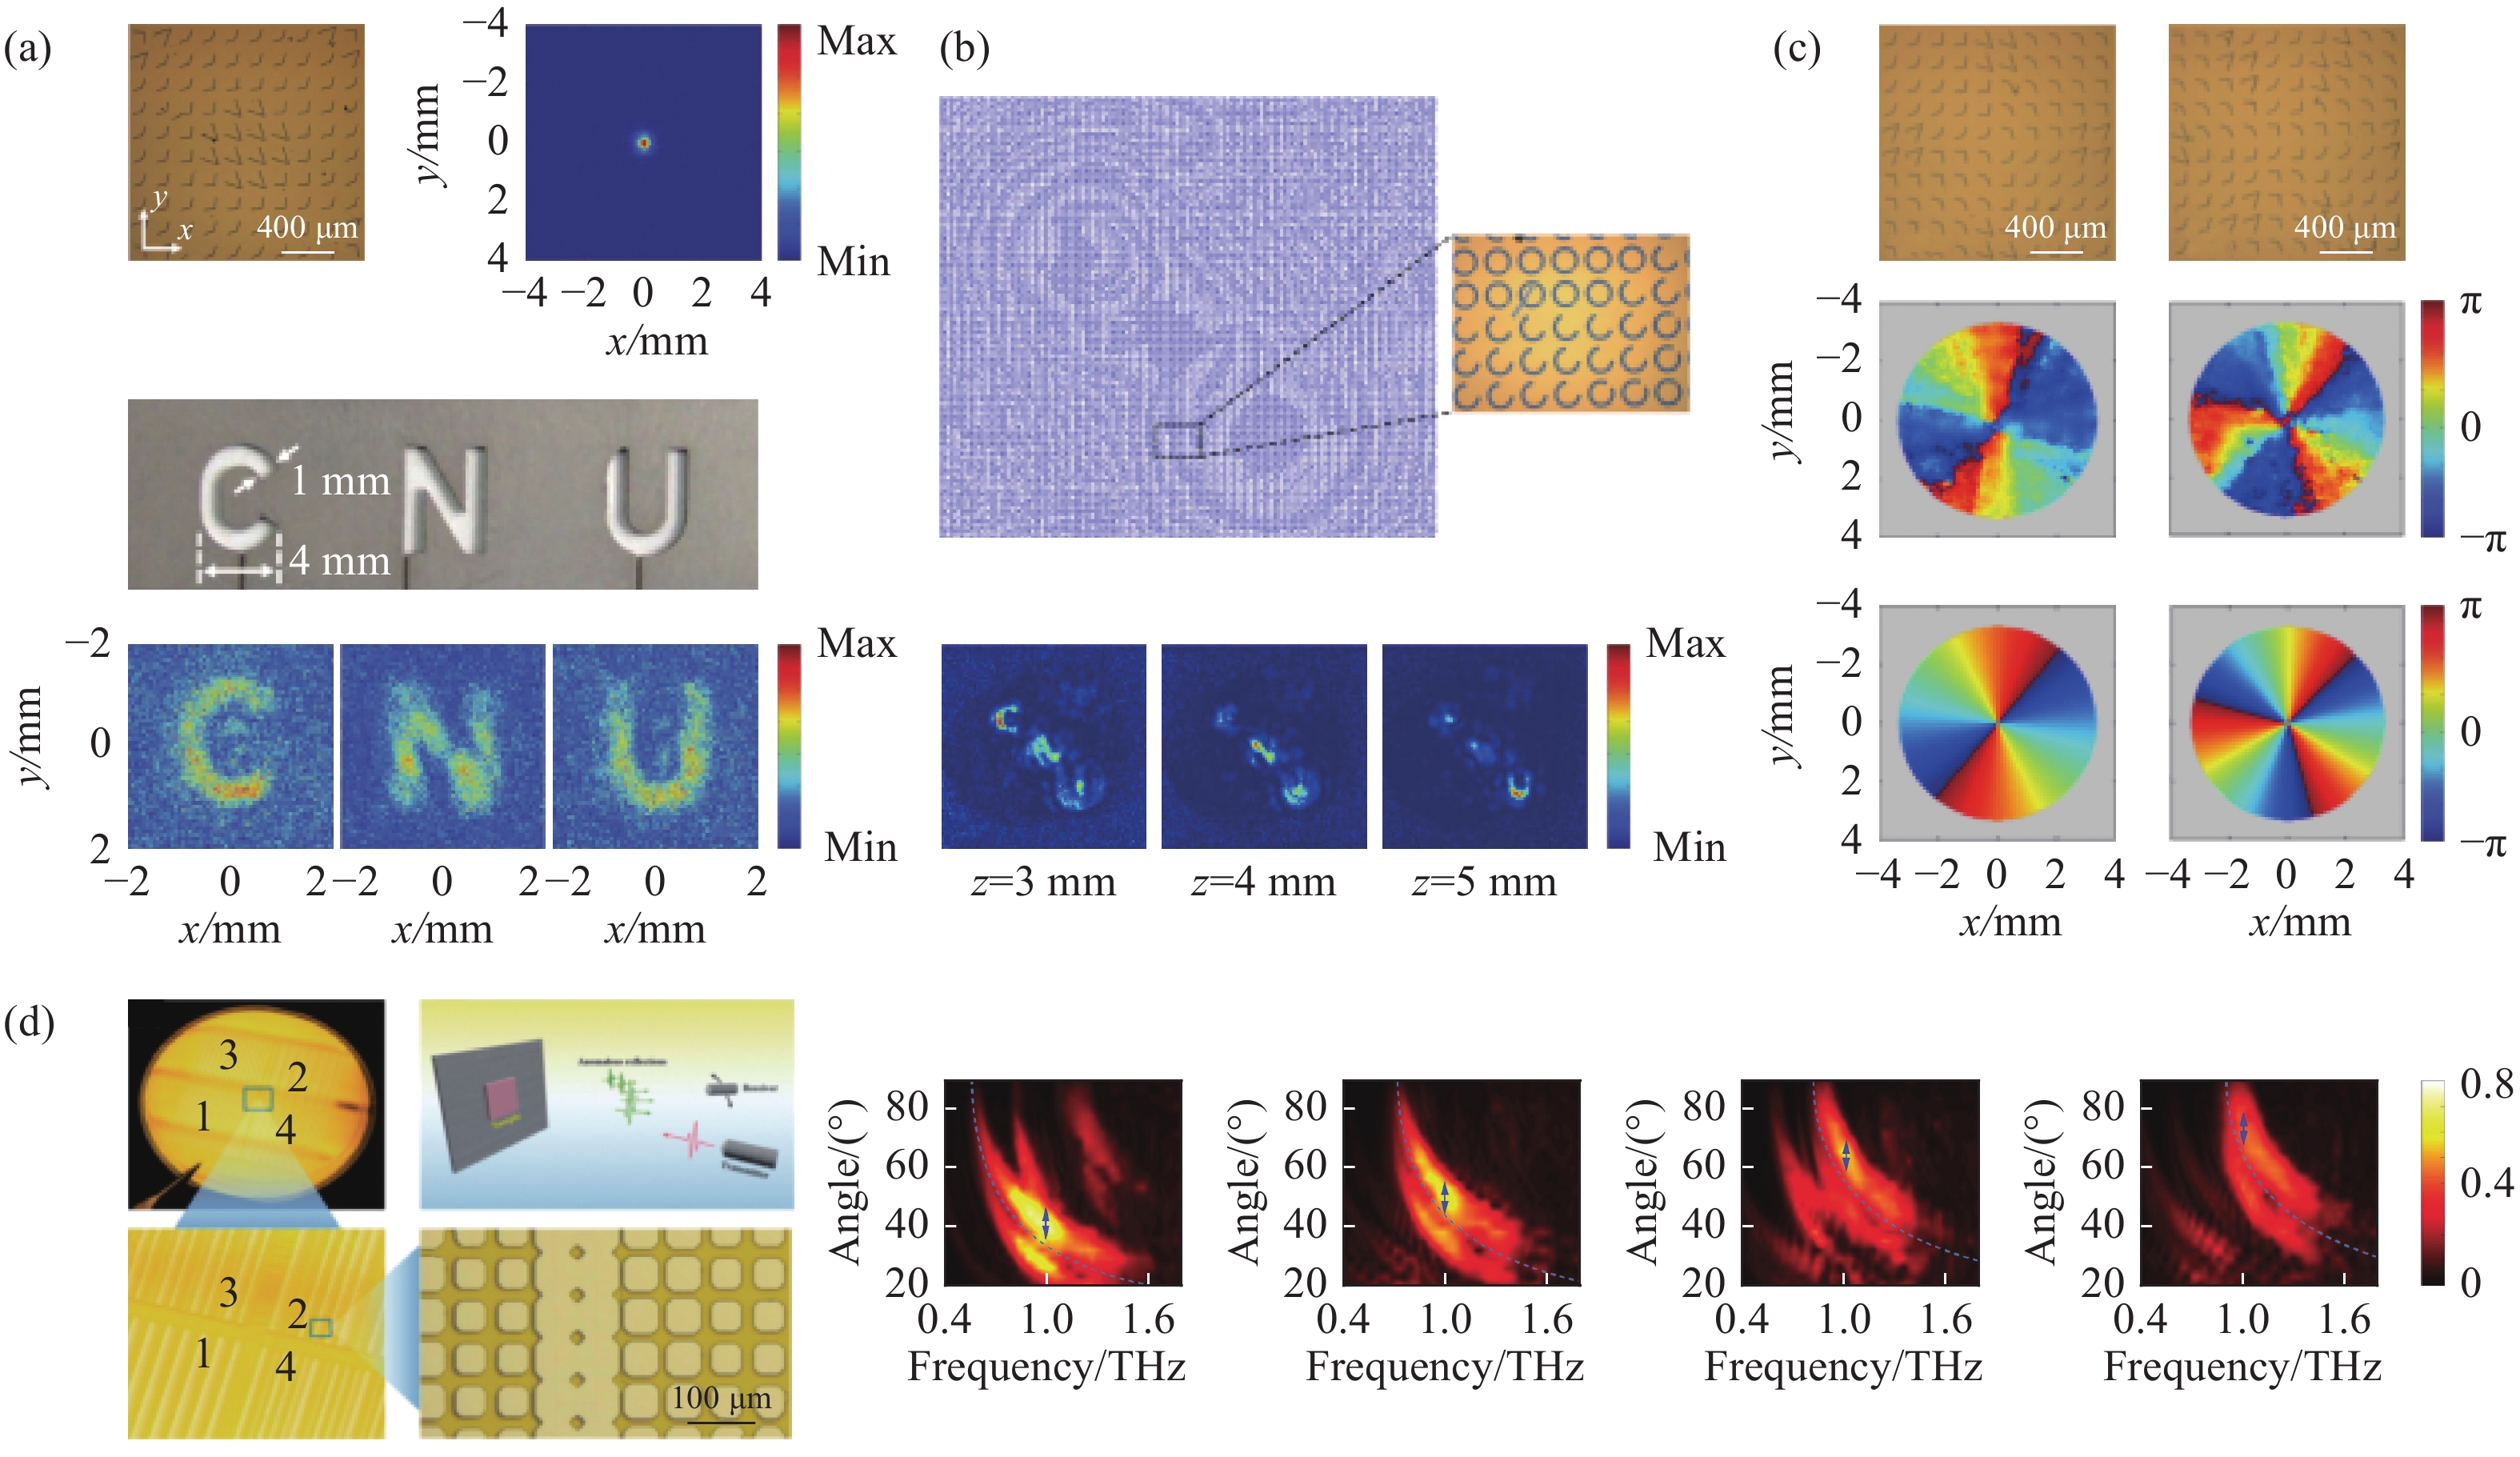 Typical terahertz (THz) metasurfaces for wavefront modulation. (a) THz metasurface lens and verification of its focusing and imaging performance; (b) THz meta-hologram and the alphabets reconstructed at different positions; (c) THz metasurfaces for generating the vortex beams with different topologies and the phase distribution of the generated vortex fields; (d) THz coded metasurfaces and the experiment results of beam deflection